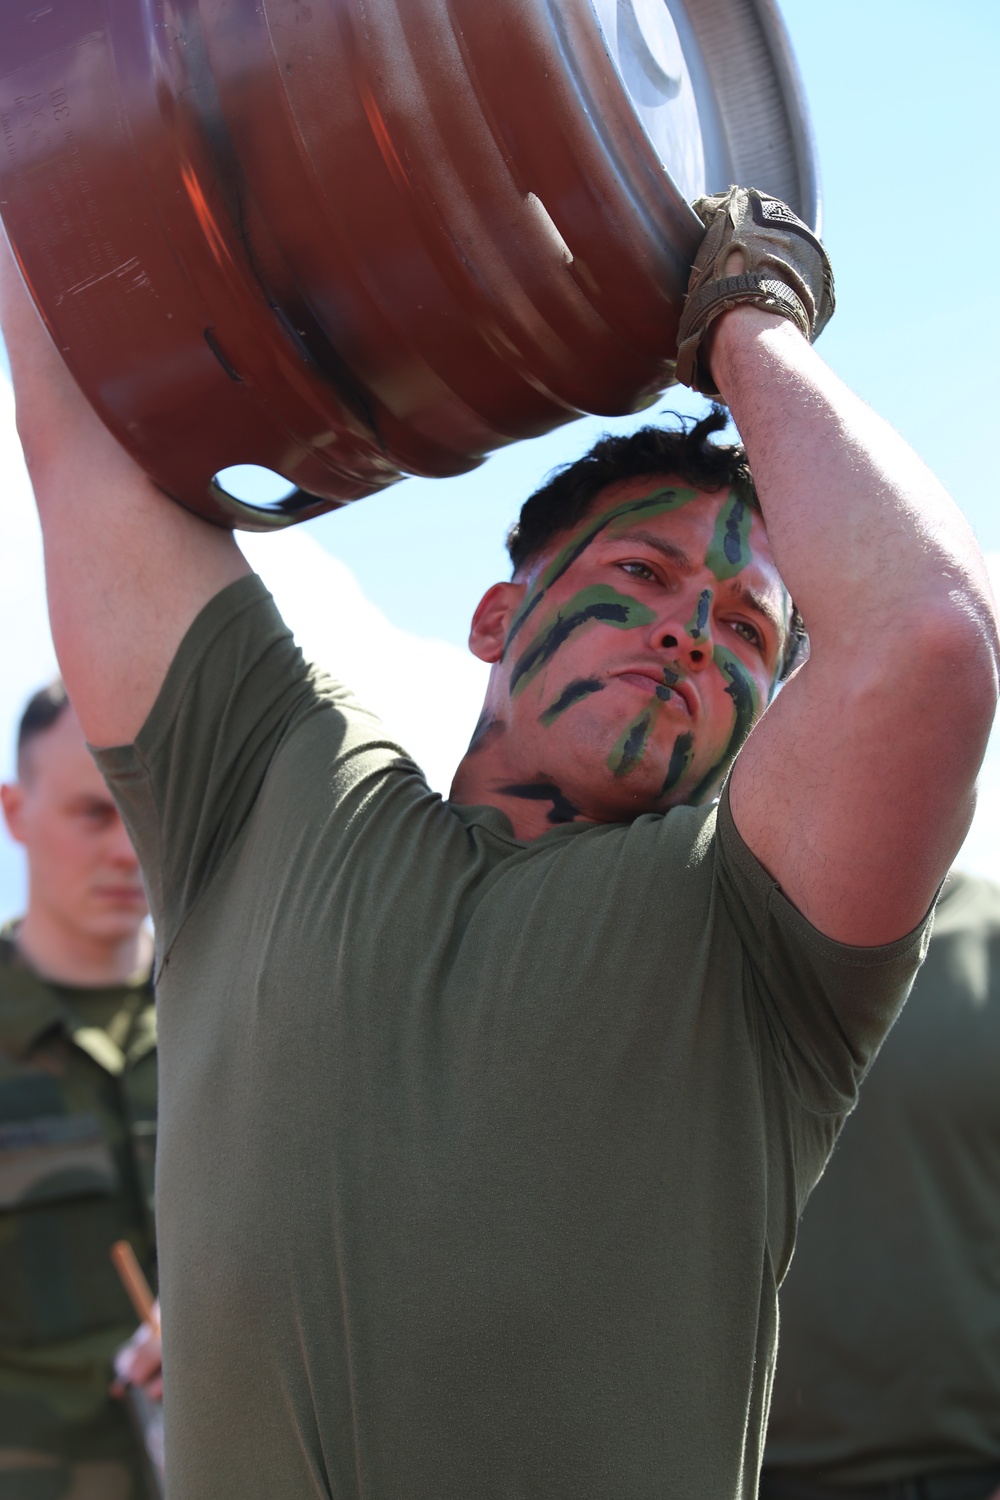 Warriors Elite: Marines compete against Norwegian soldiers during annual Viking Challenge